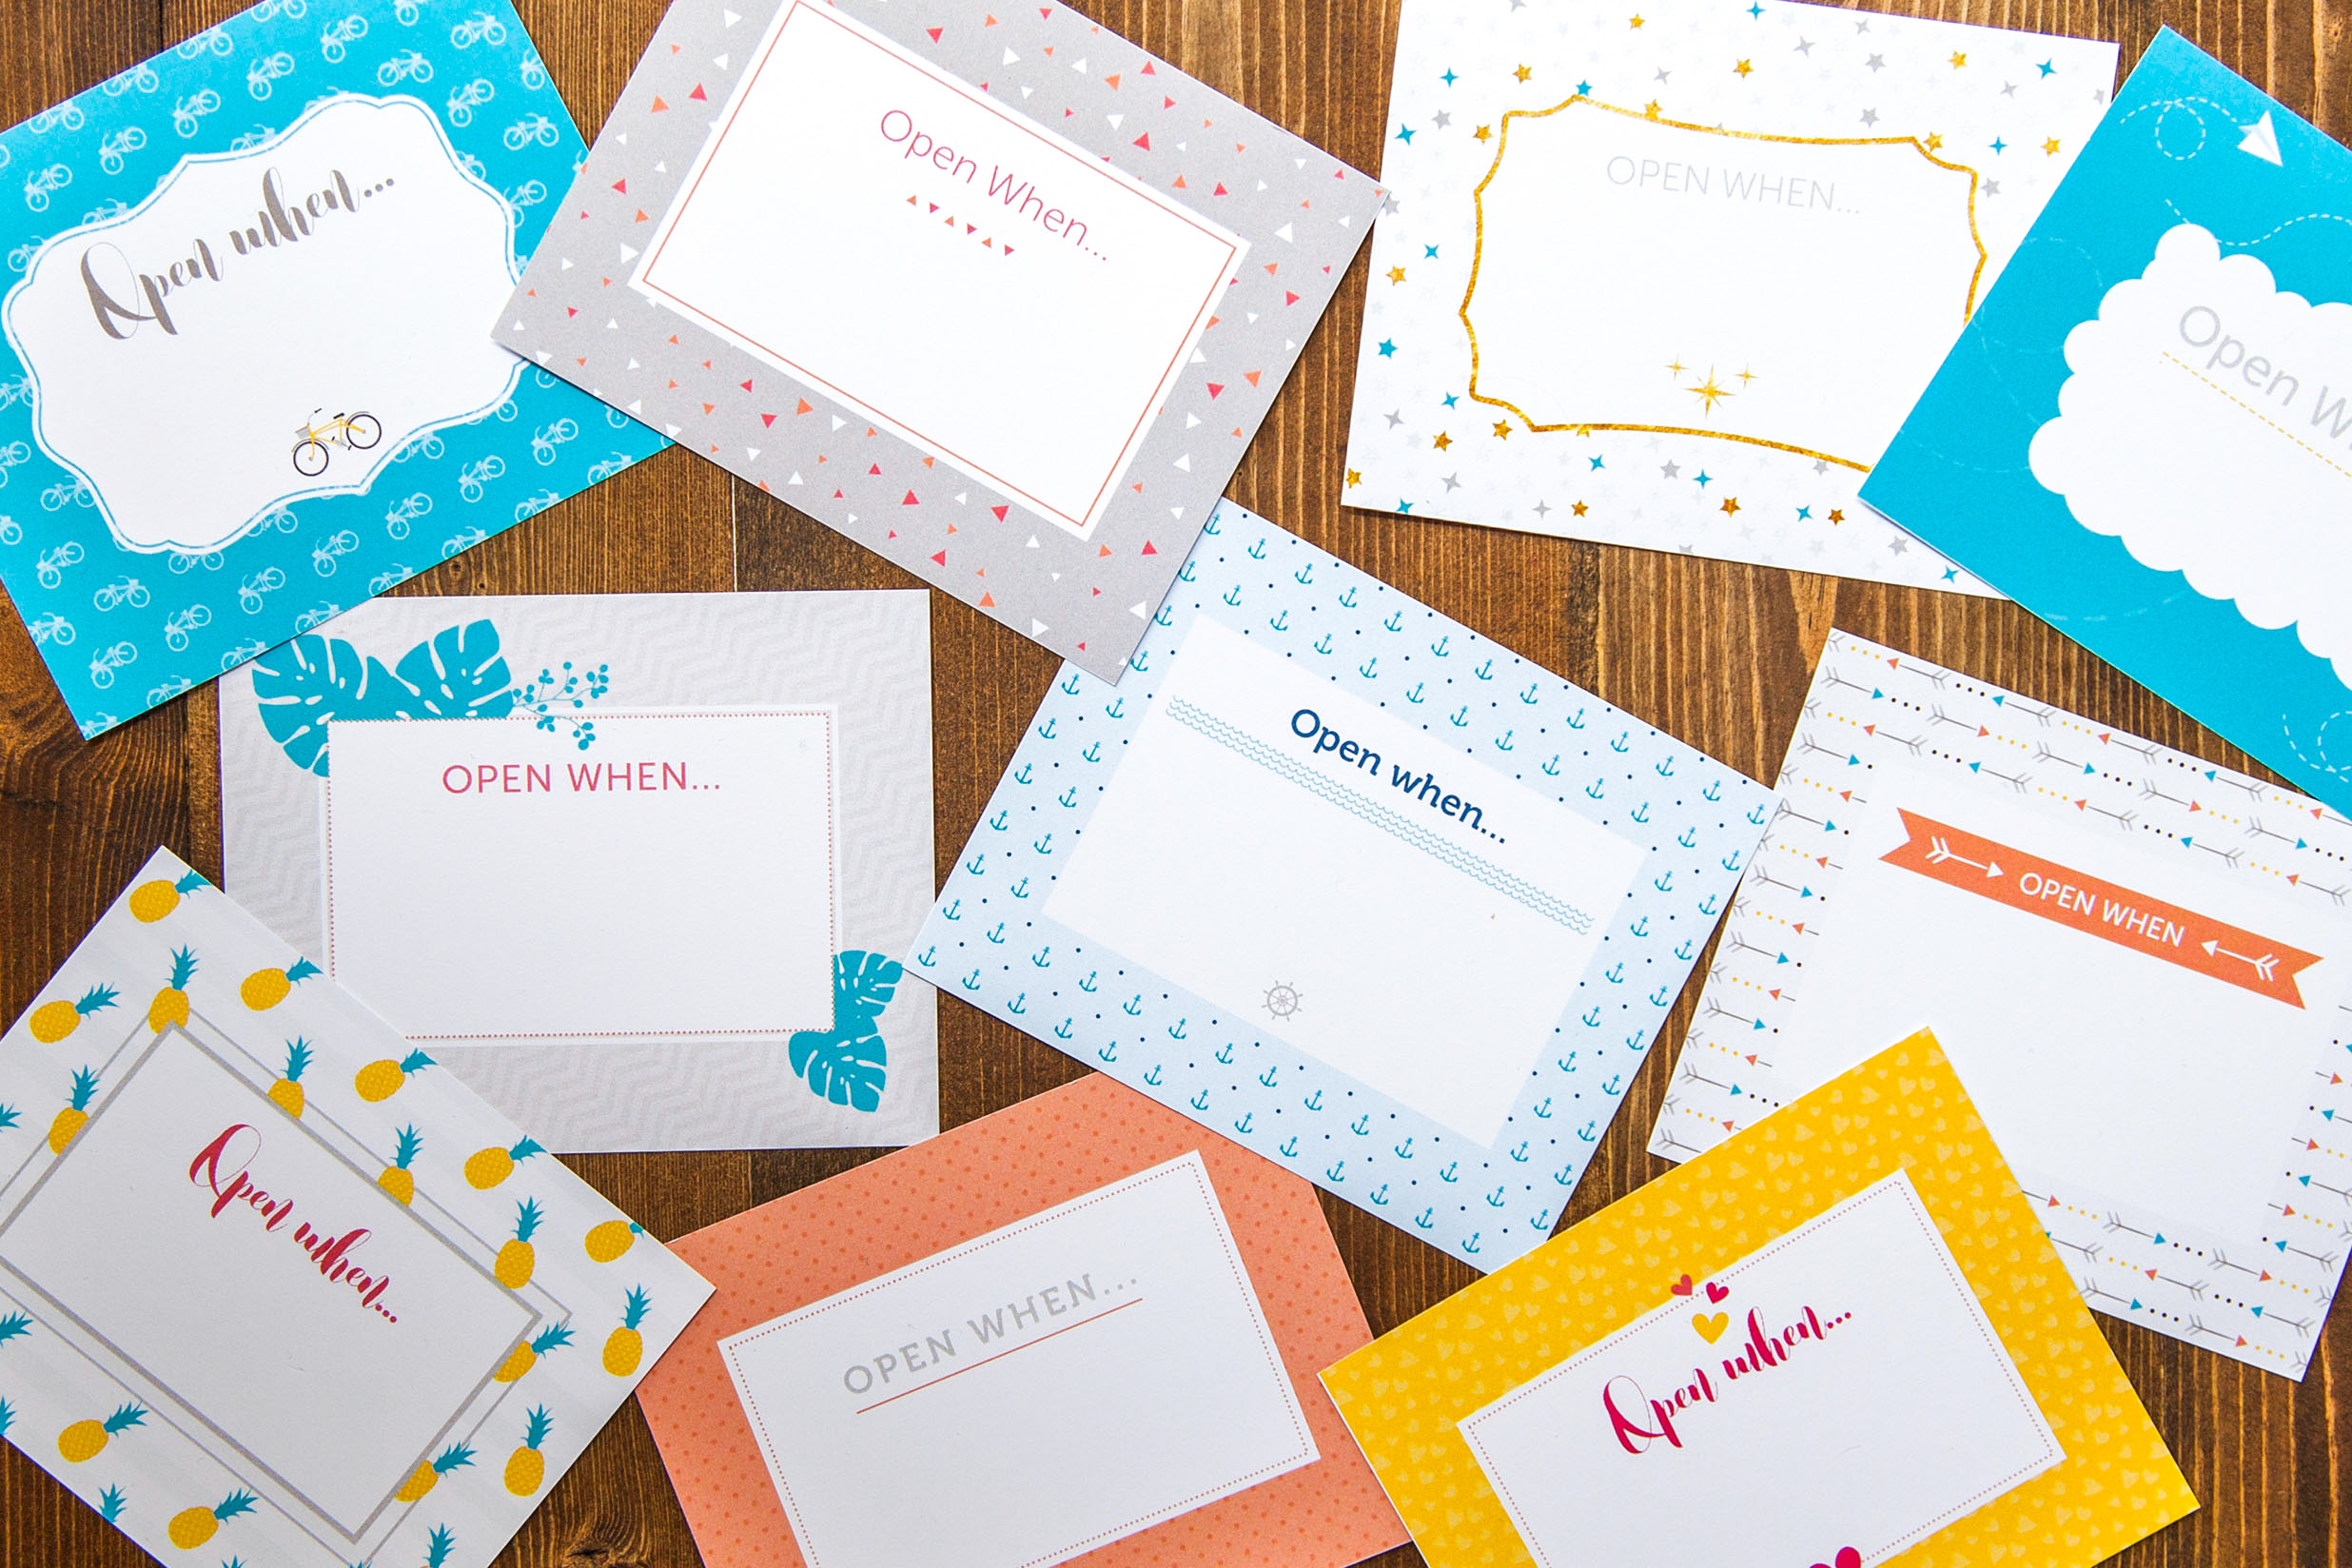 Open When Letters: 21 Ideas + Printables - Shari